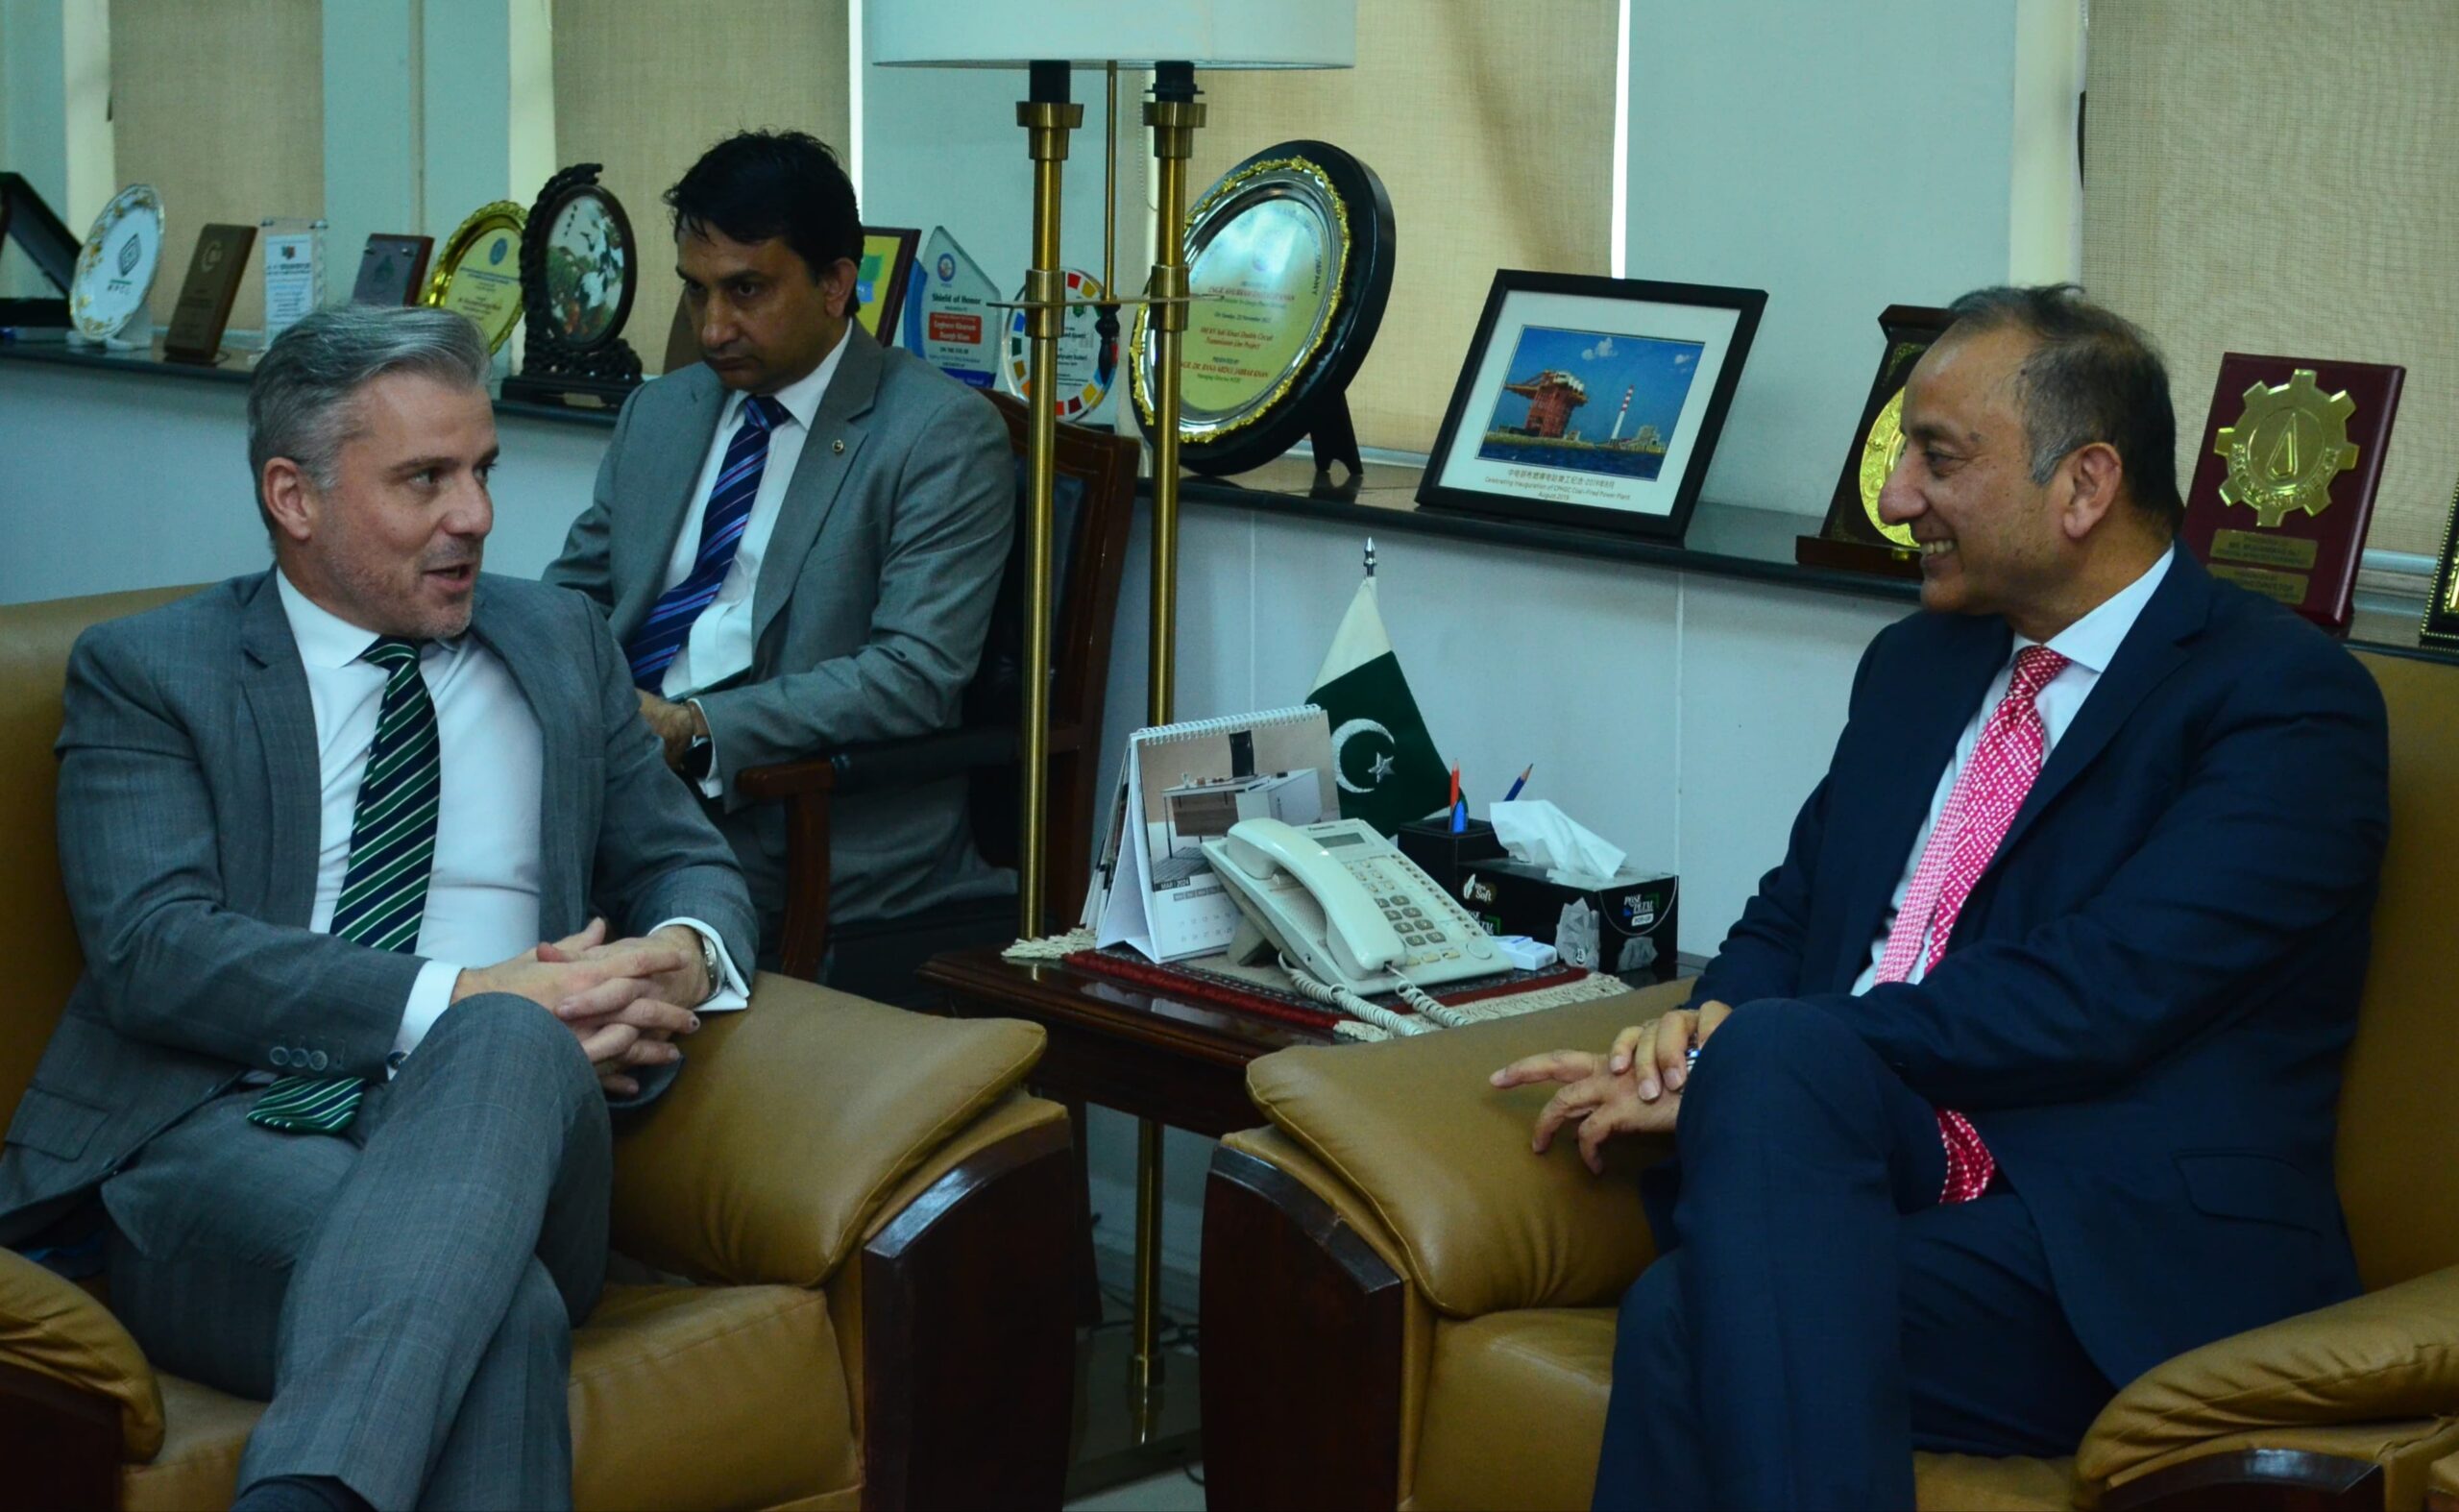 FRENCH DEPUTY HEAD OF MISSION EXPRESSES INTEREST IN ENERGY SECTOR INVESTMENT IN PAKISTAN.